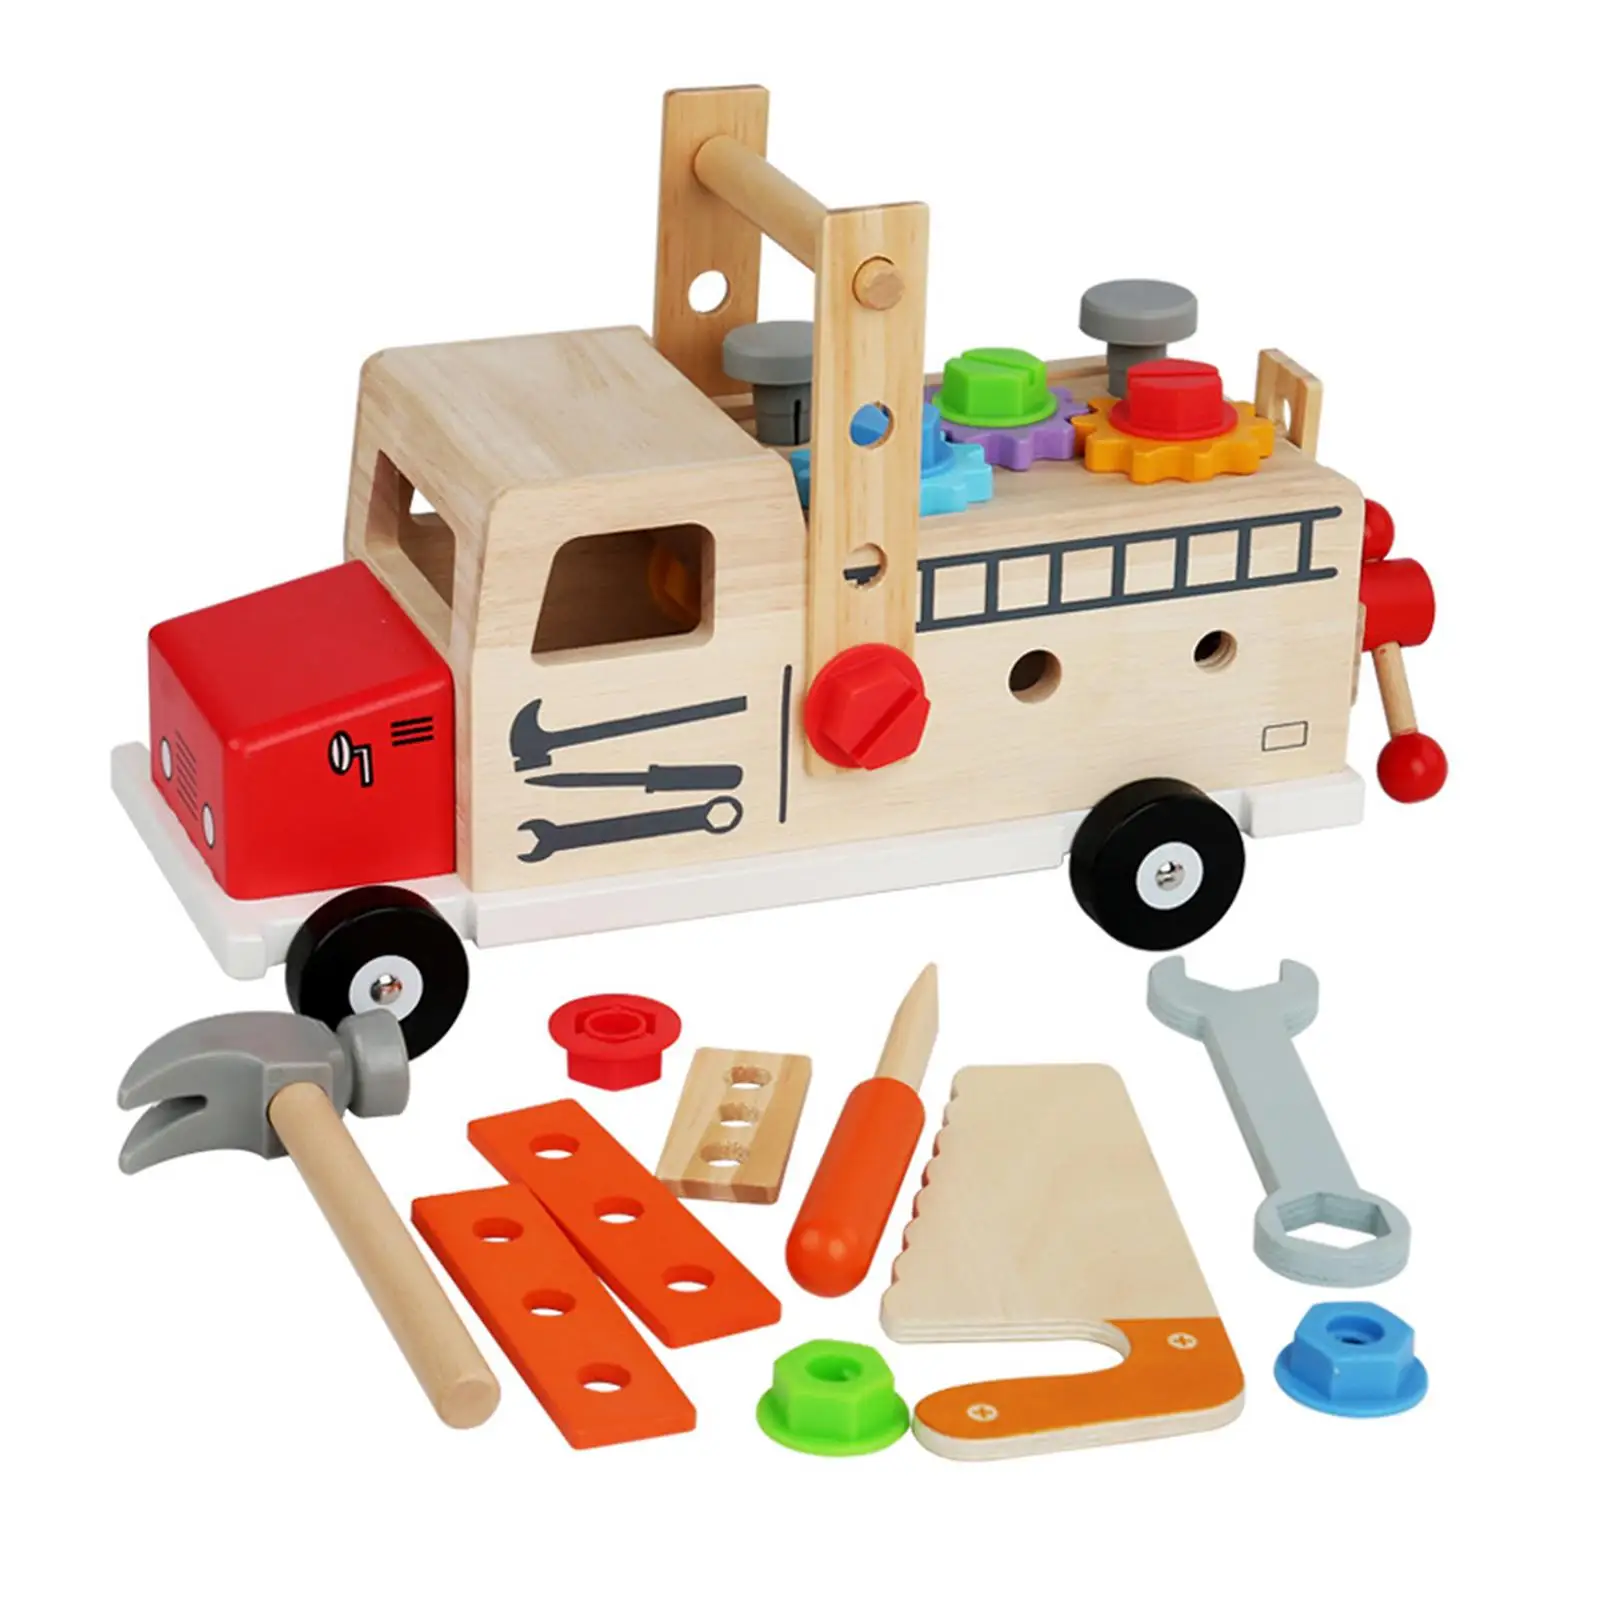 Construction Toy Educational Wood Kids Tool Set Pretend Play Tool Kits for Children 3 4 5 6 Years Old Boys Girls Xmas Present